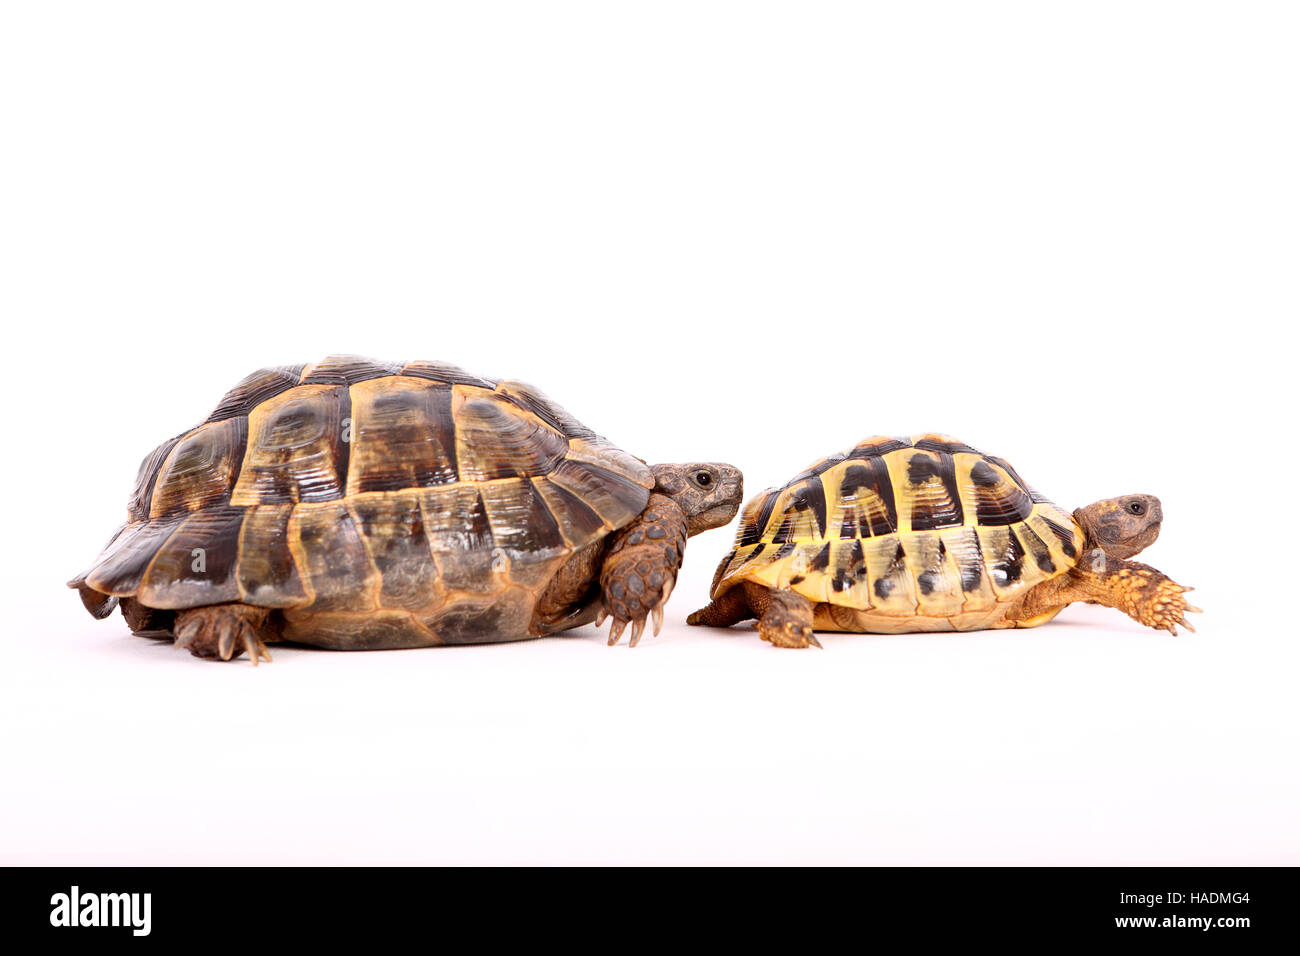 Hermanns Tortoise (Testudo hermanni) and Mediterranean Spur-thighed Tortoise, Greek Tortoise (Testudo graeca) seen from the side. Studio picture against a white background. Germany Stock Photo